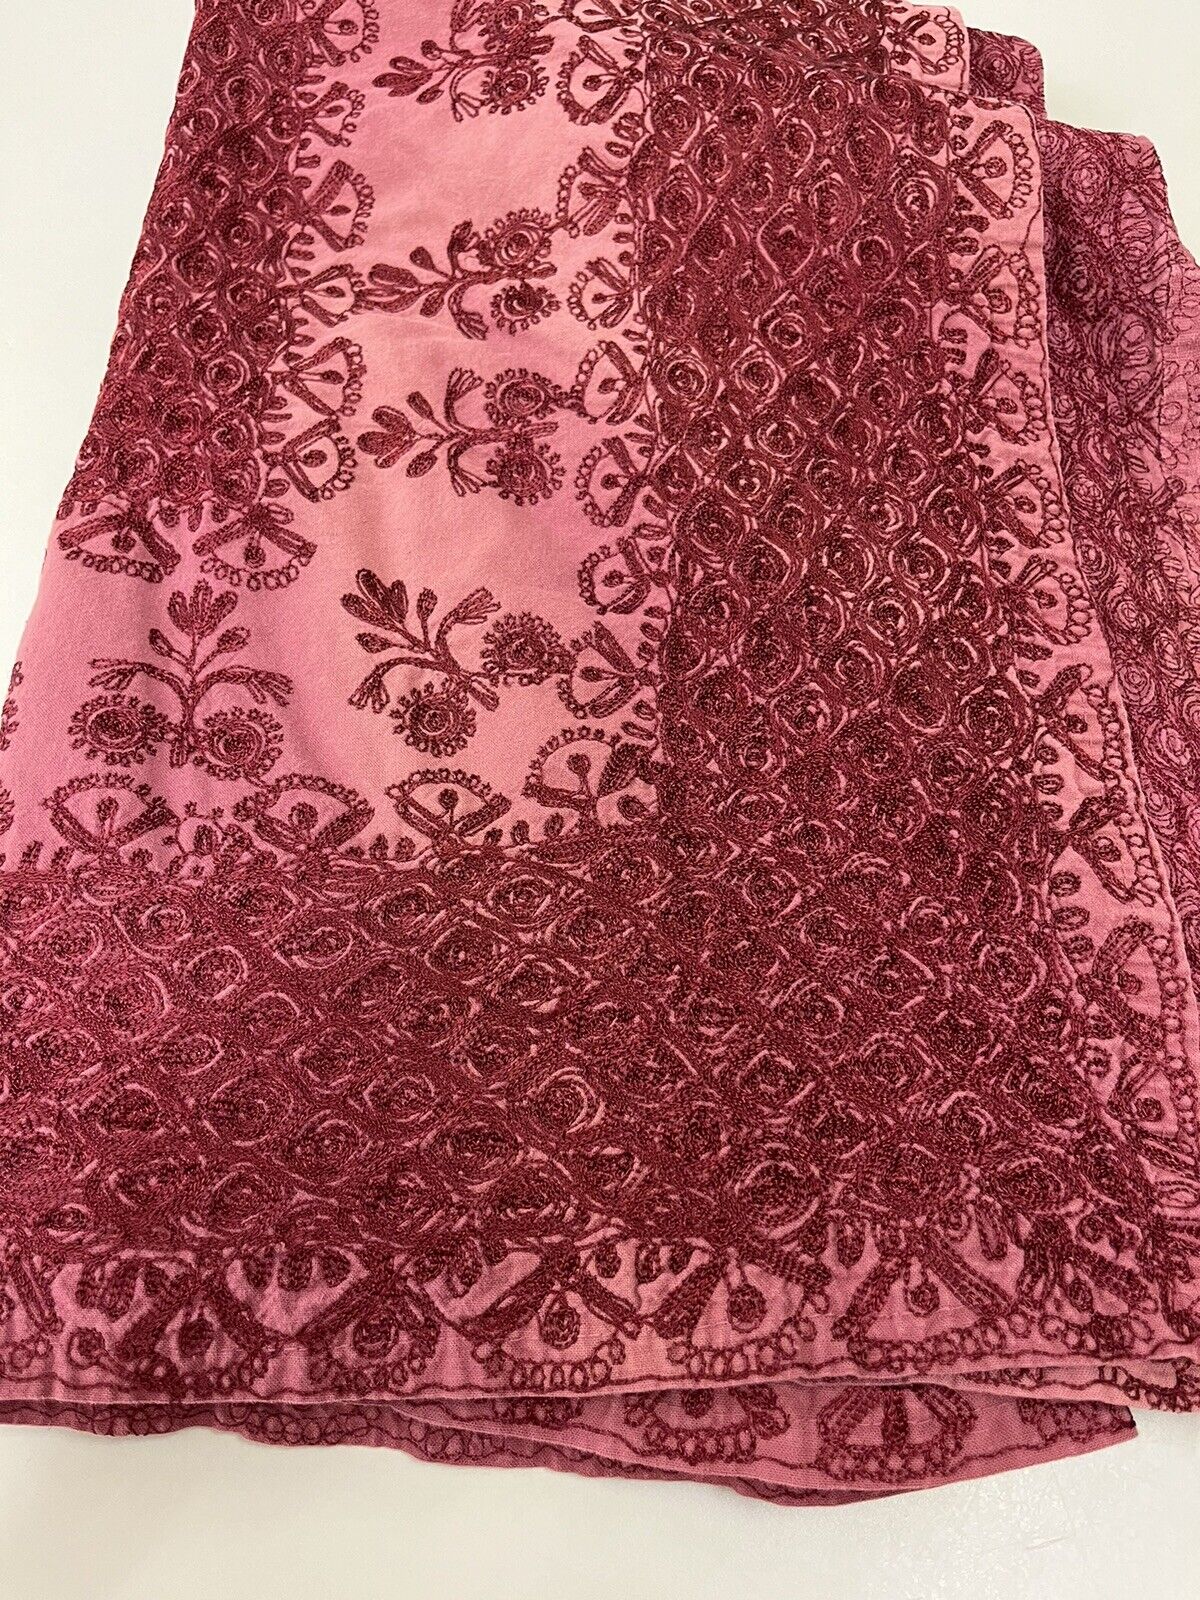 Vintage Middle Eastern Ornate Burgundy Embroidered Banquet Tablecloth 60”x 100”